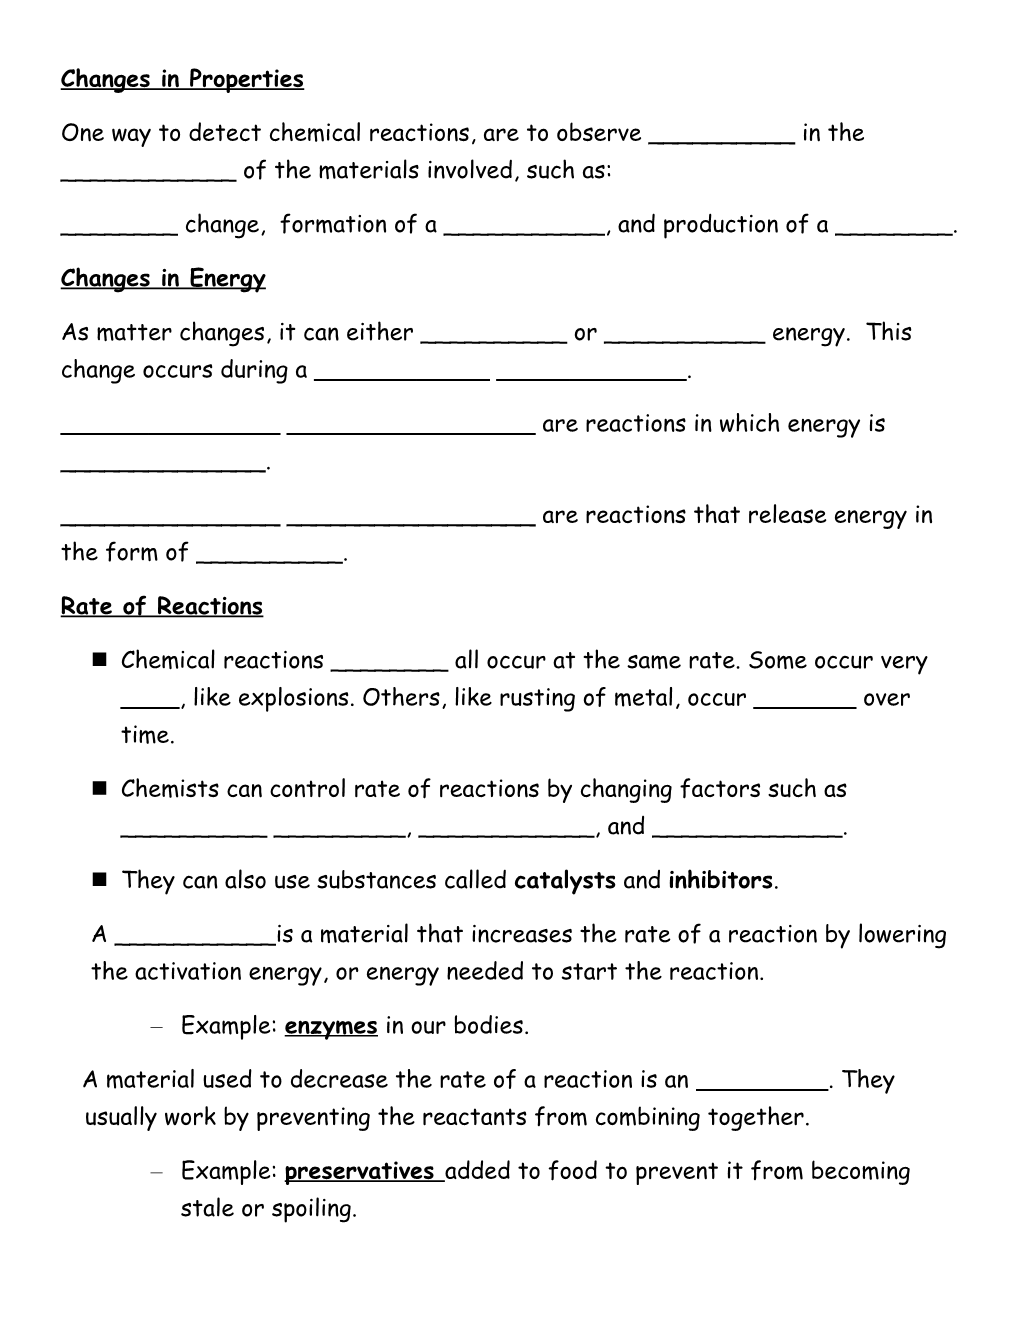 Chemical Changes and Reactions- Guided Notes